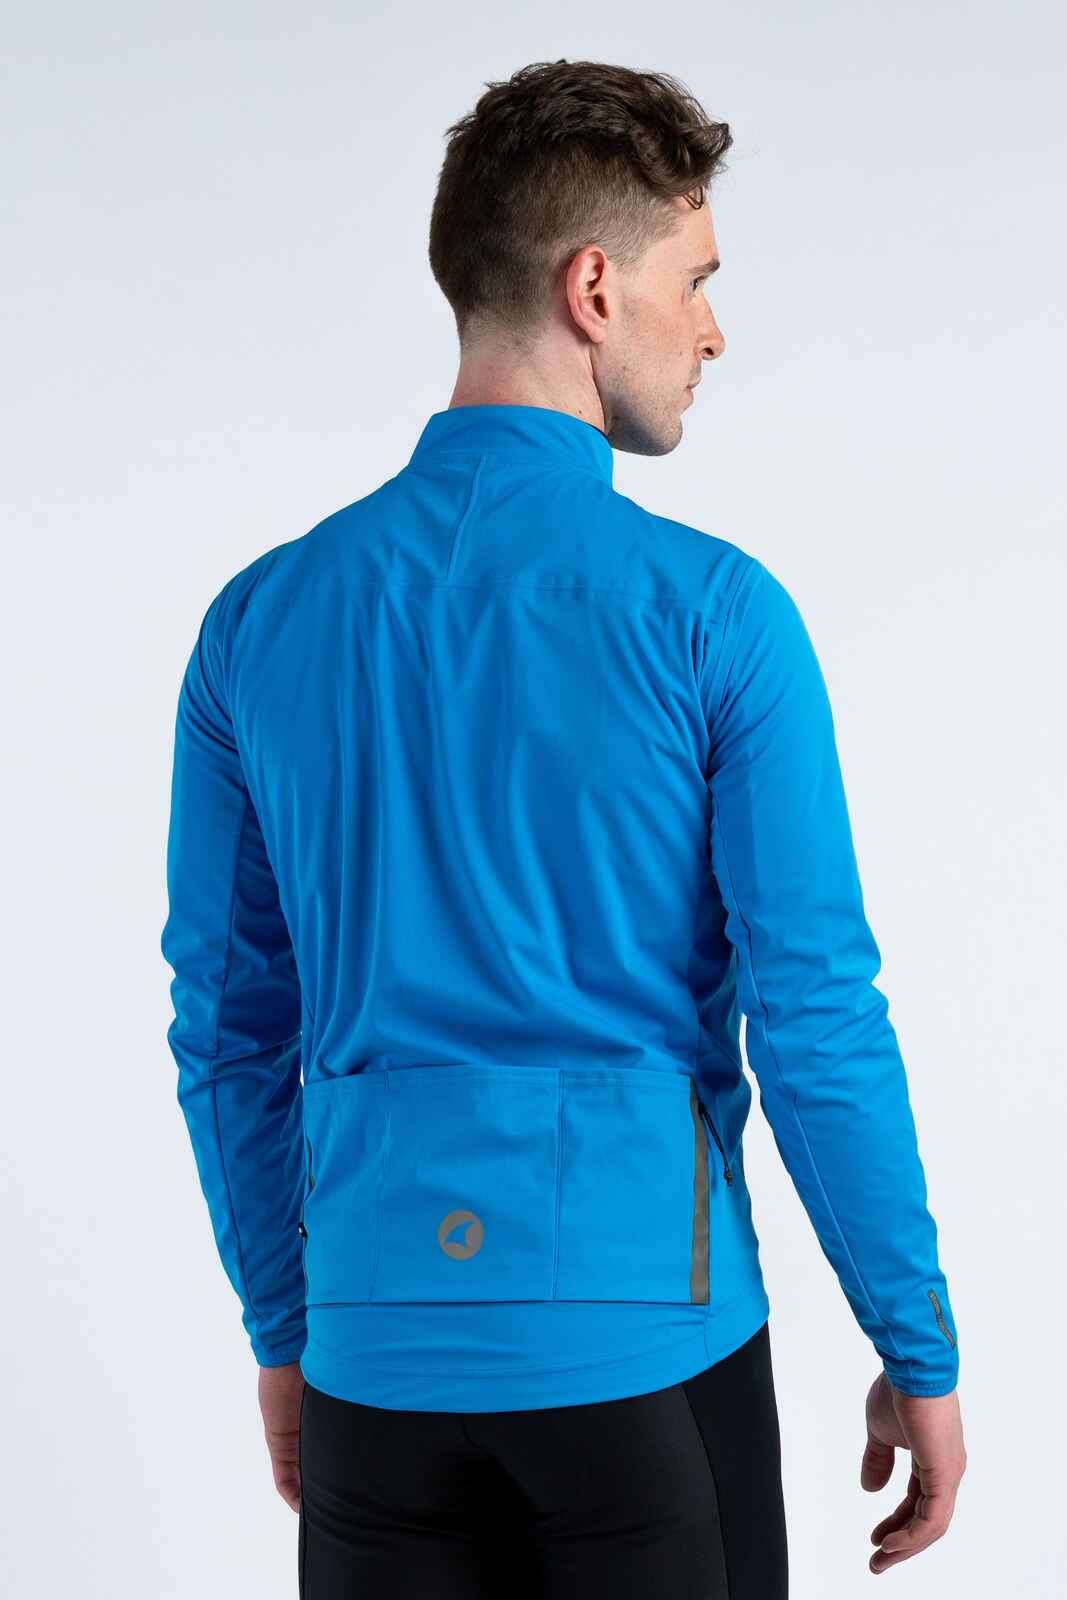 Men's Blue Cycling Jacket for Cold Wet Weather - Back View